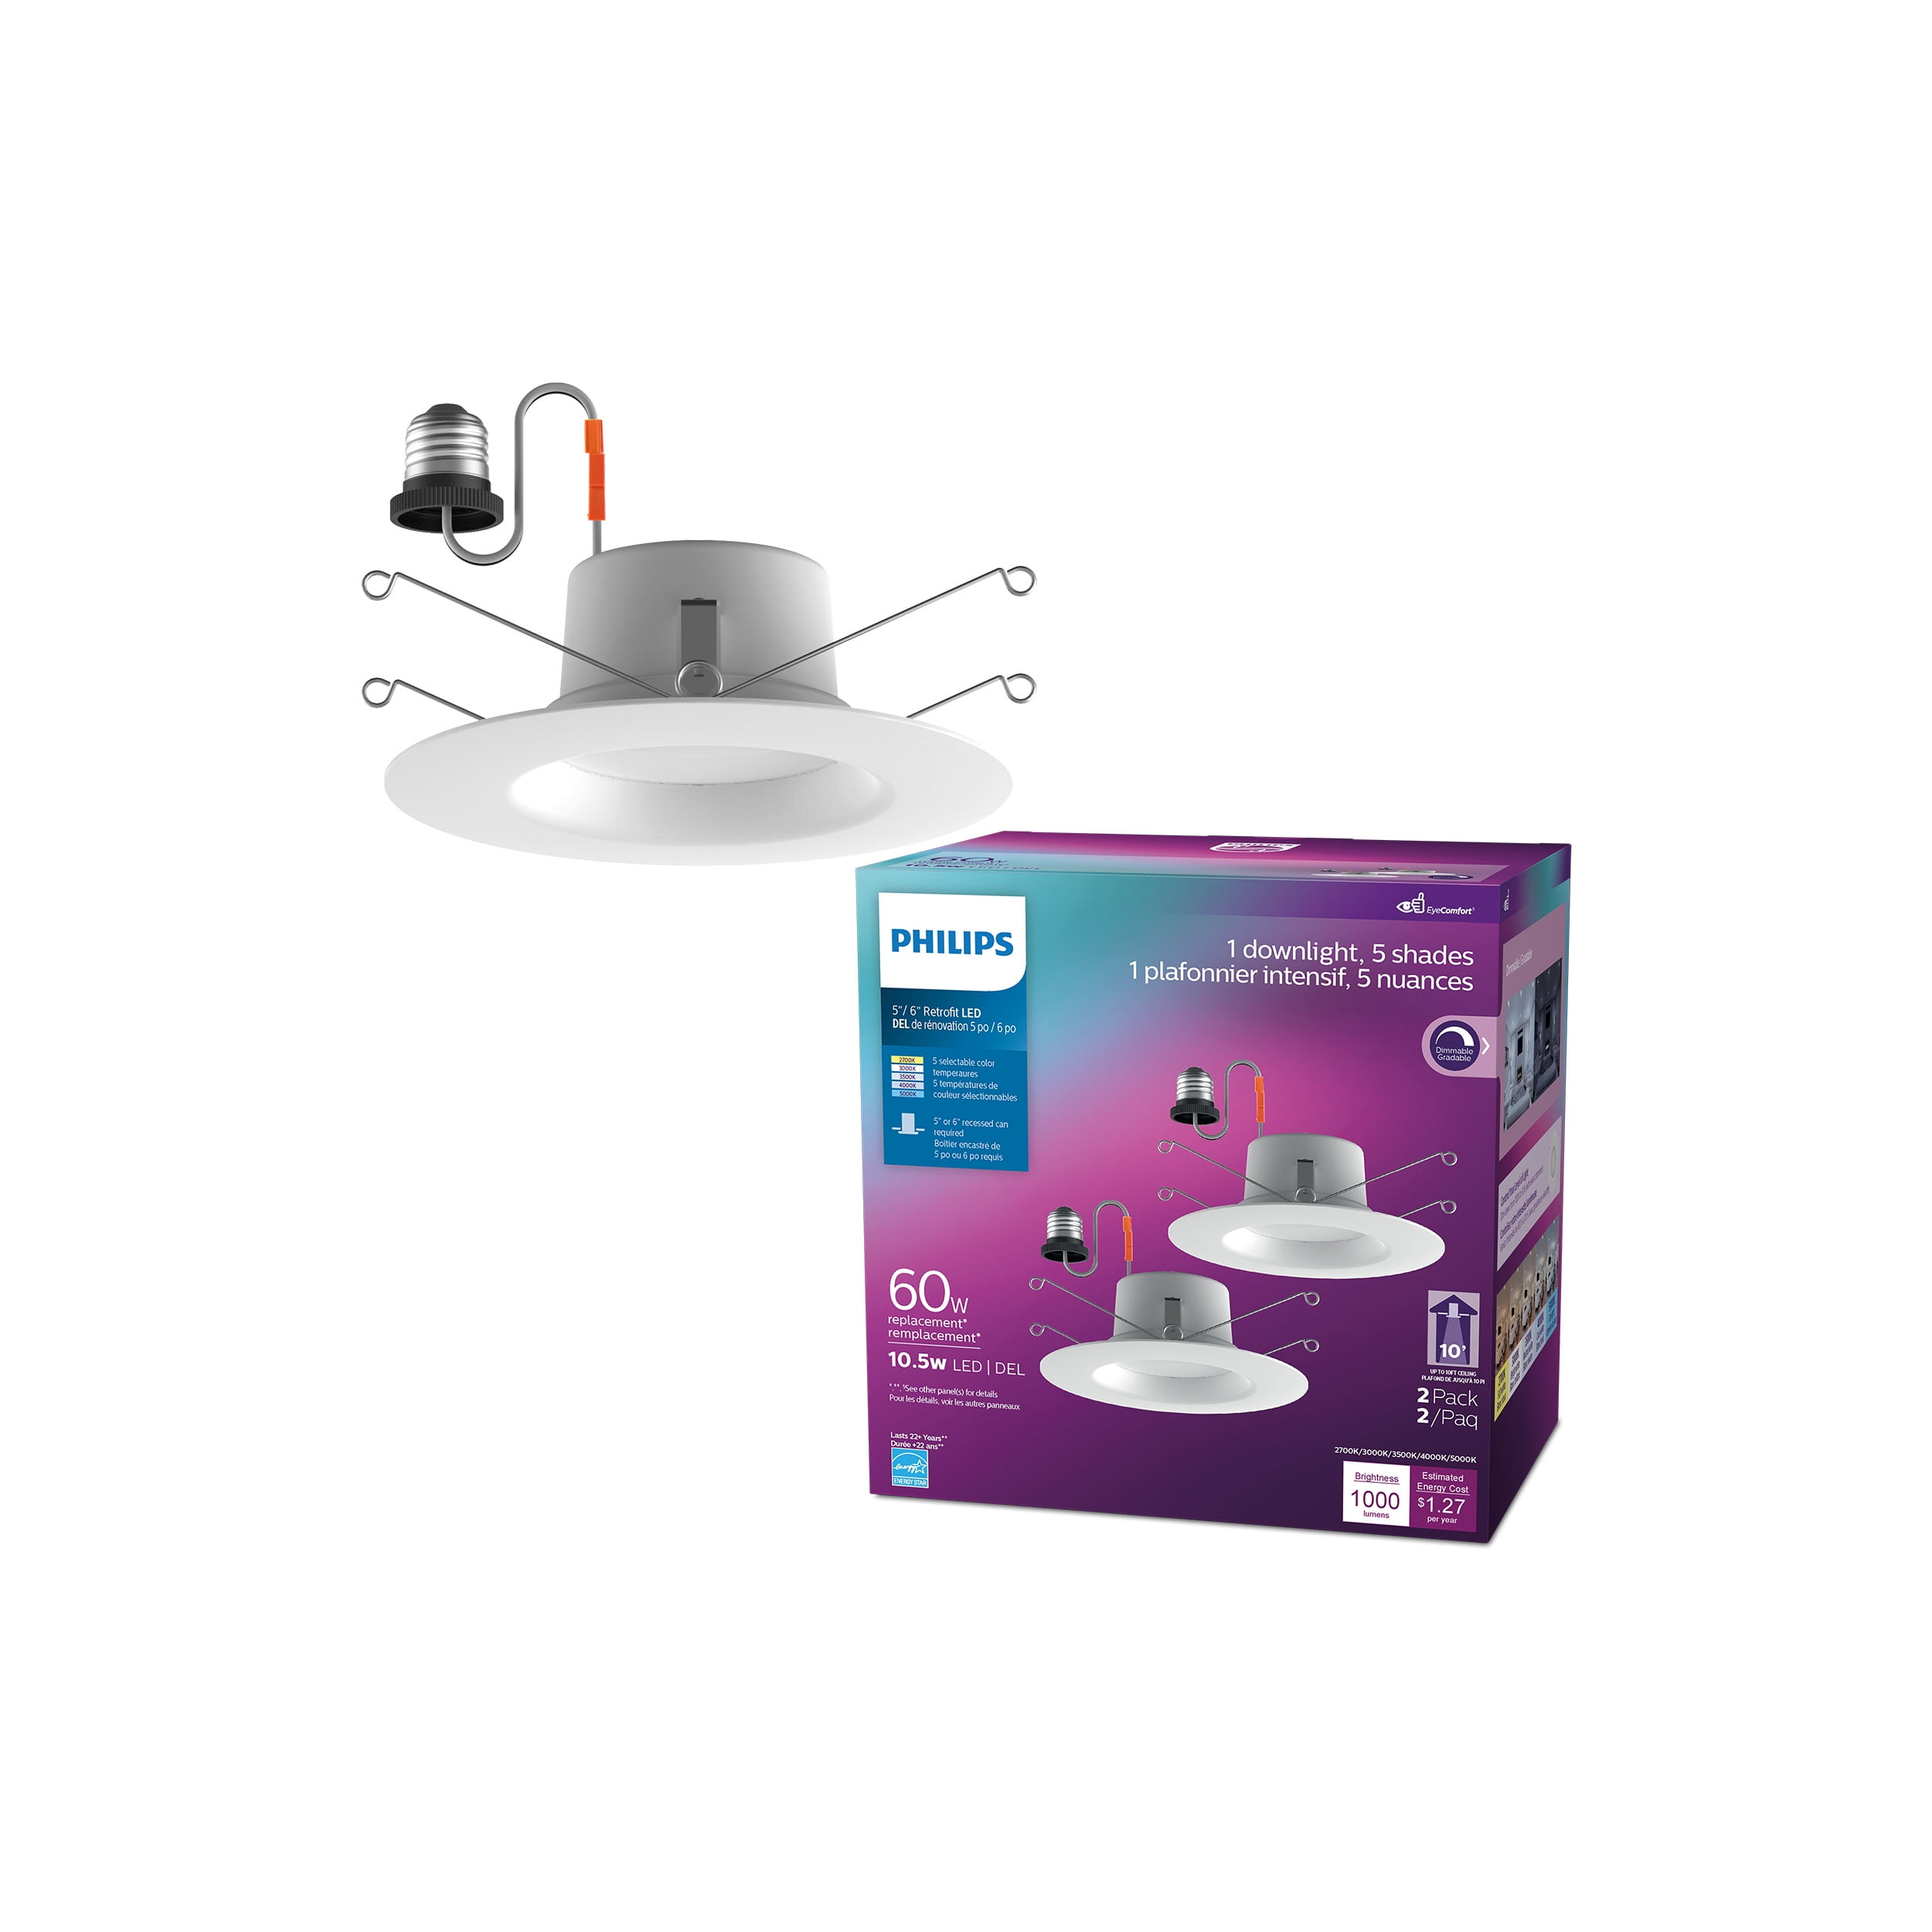 Efterligning Bar Regn Philips LED 60-Watt 5 to 6-inch Trim Size Can Retrofit Downlight, 5 Shades  of White, Dimmable (2-Pack) - Walmart.com